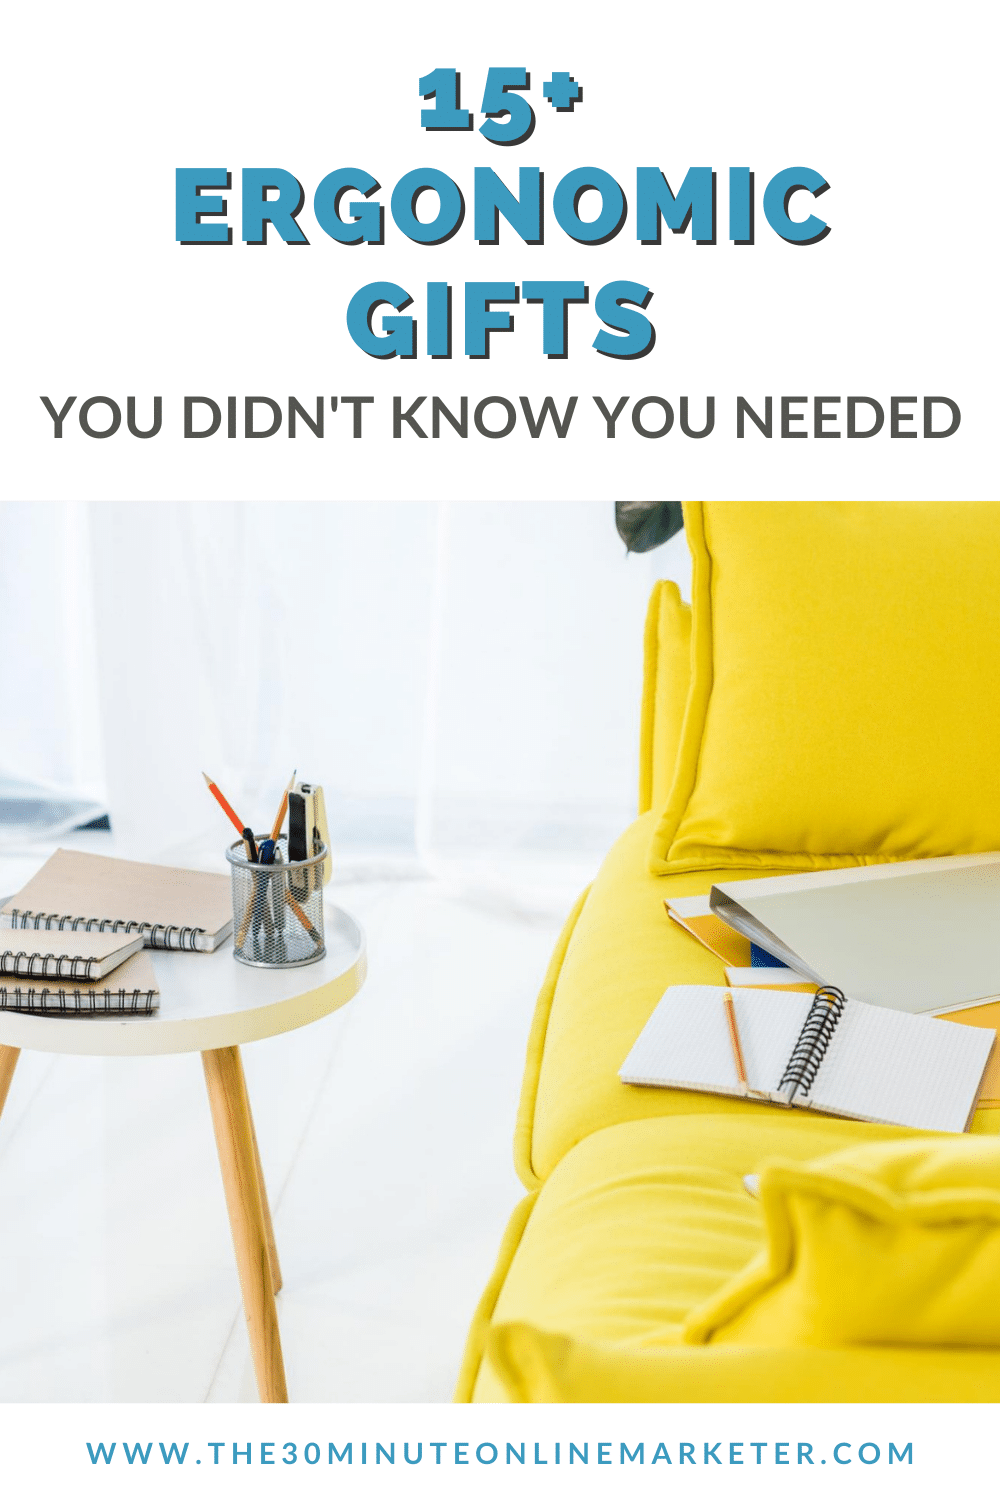 Ergonomic Gifts You Didn't Know You Needed